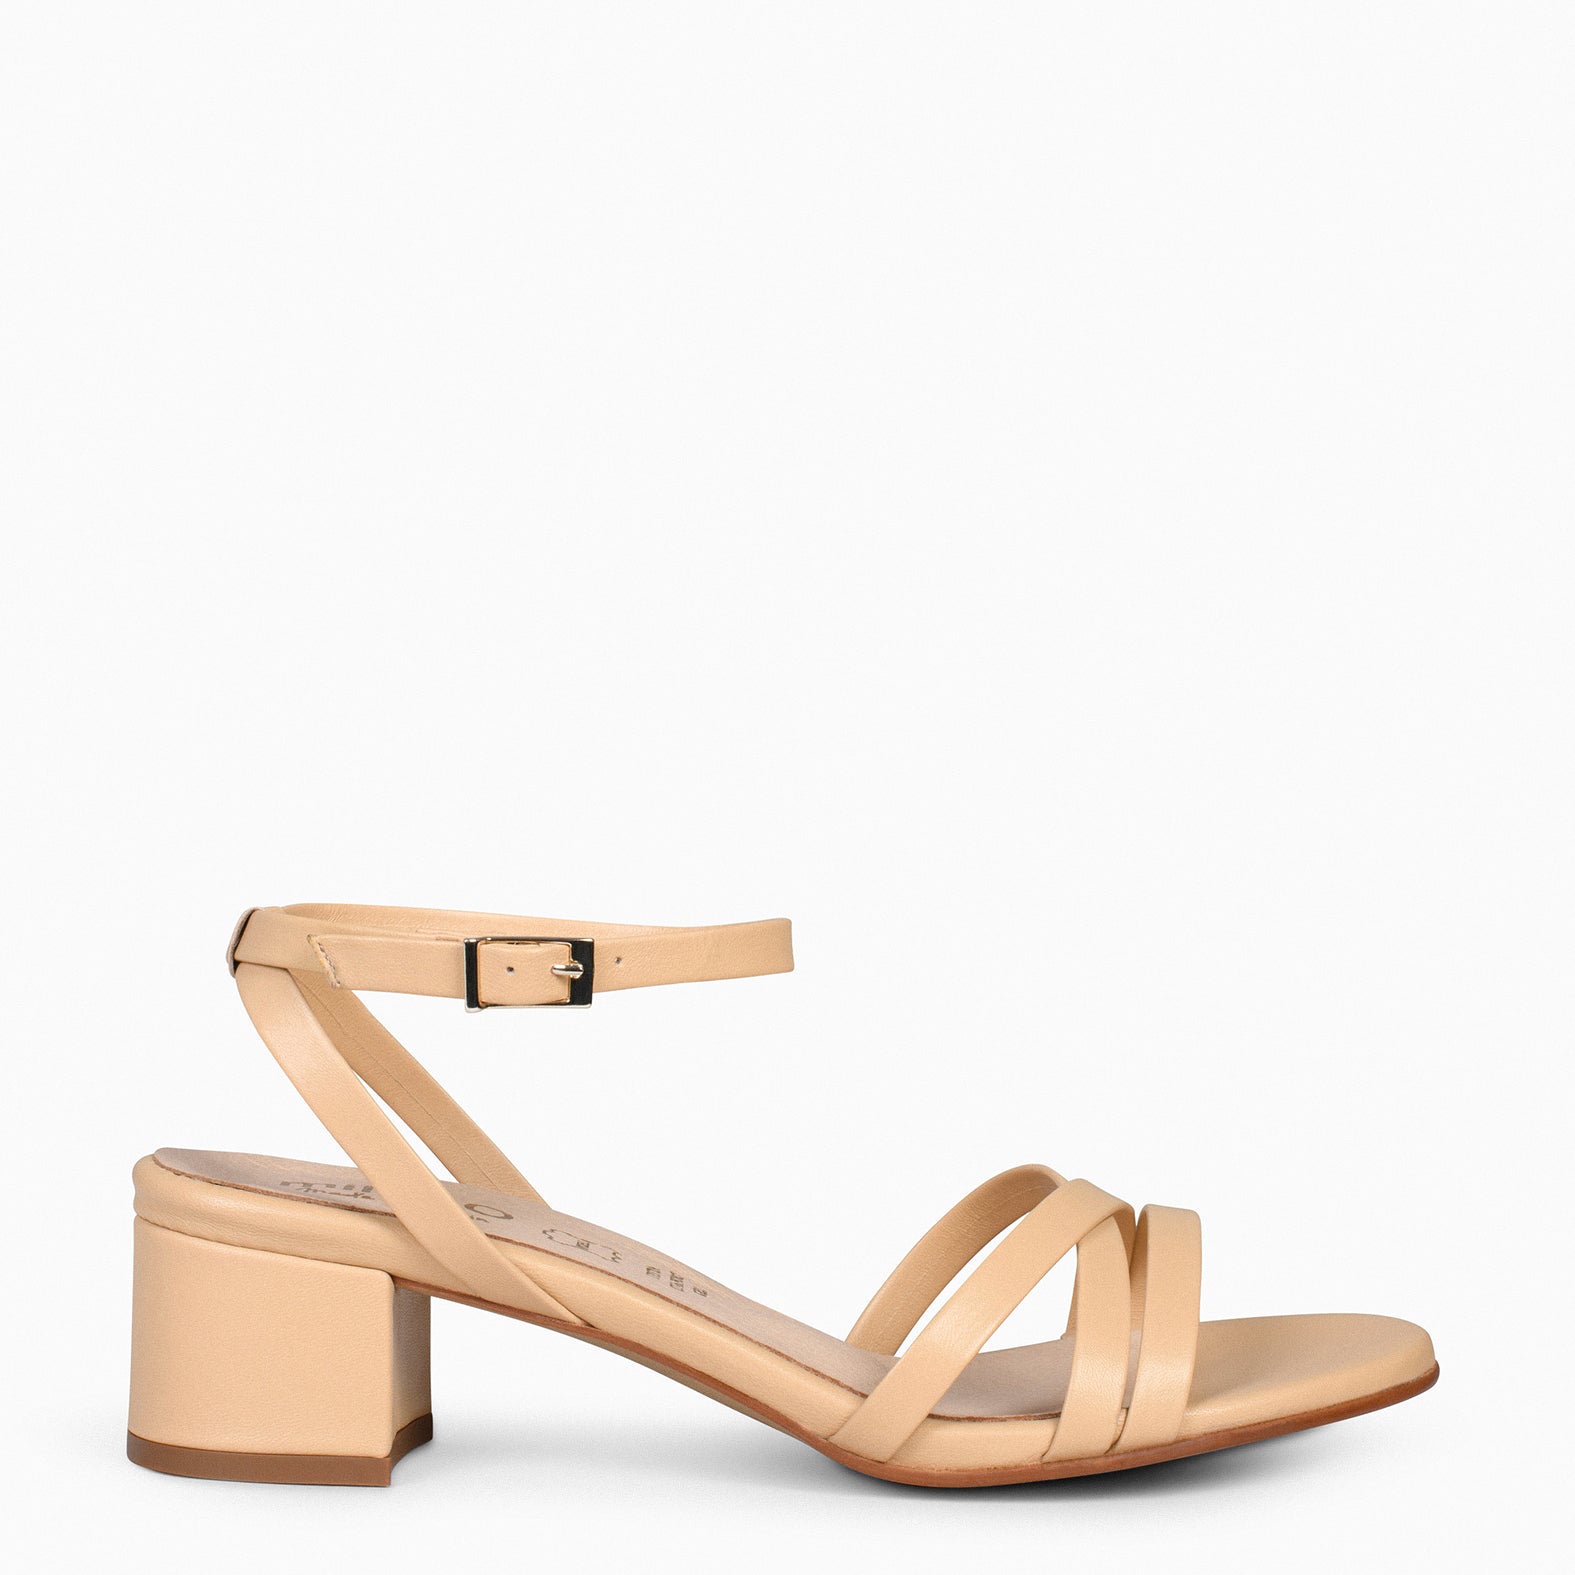 VIENA – BEIGE SANDAL WITH THIN STRAPS AND LOW HEEL